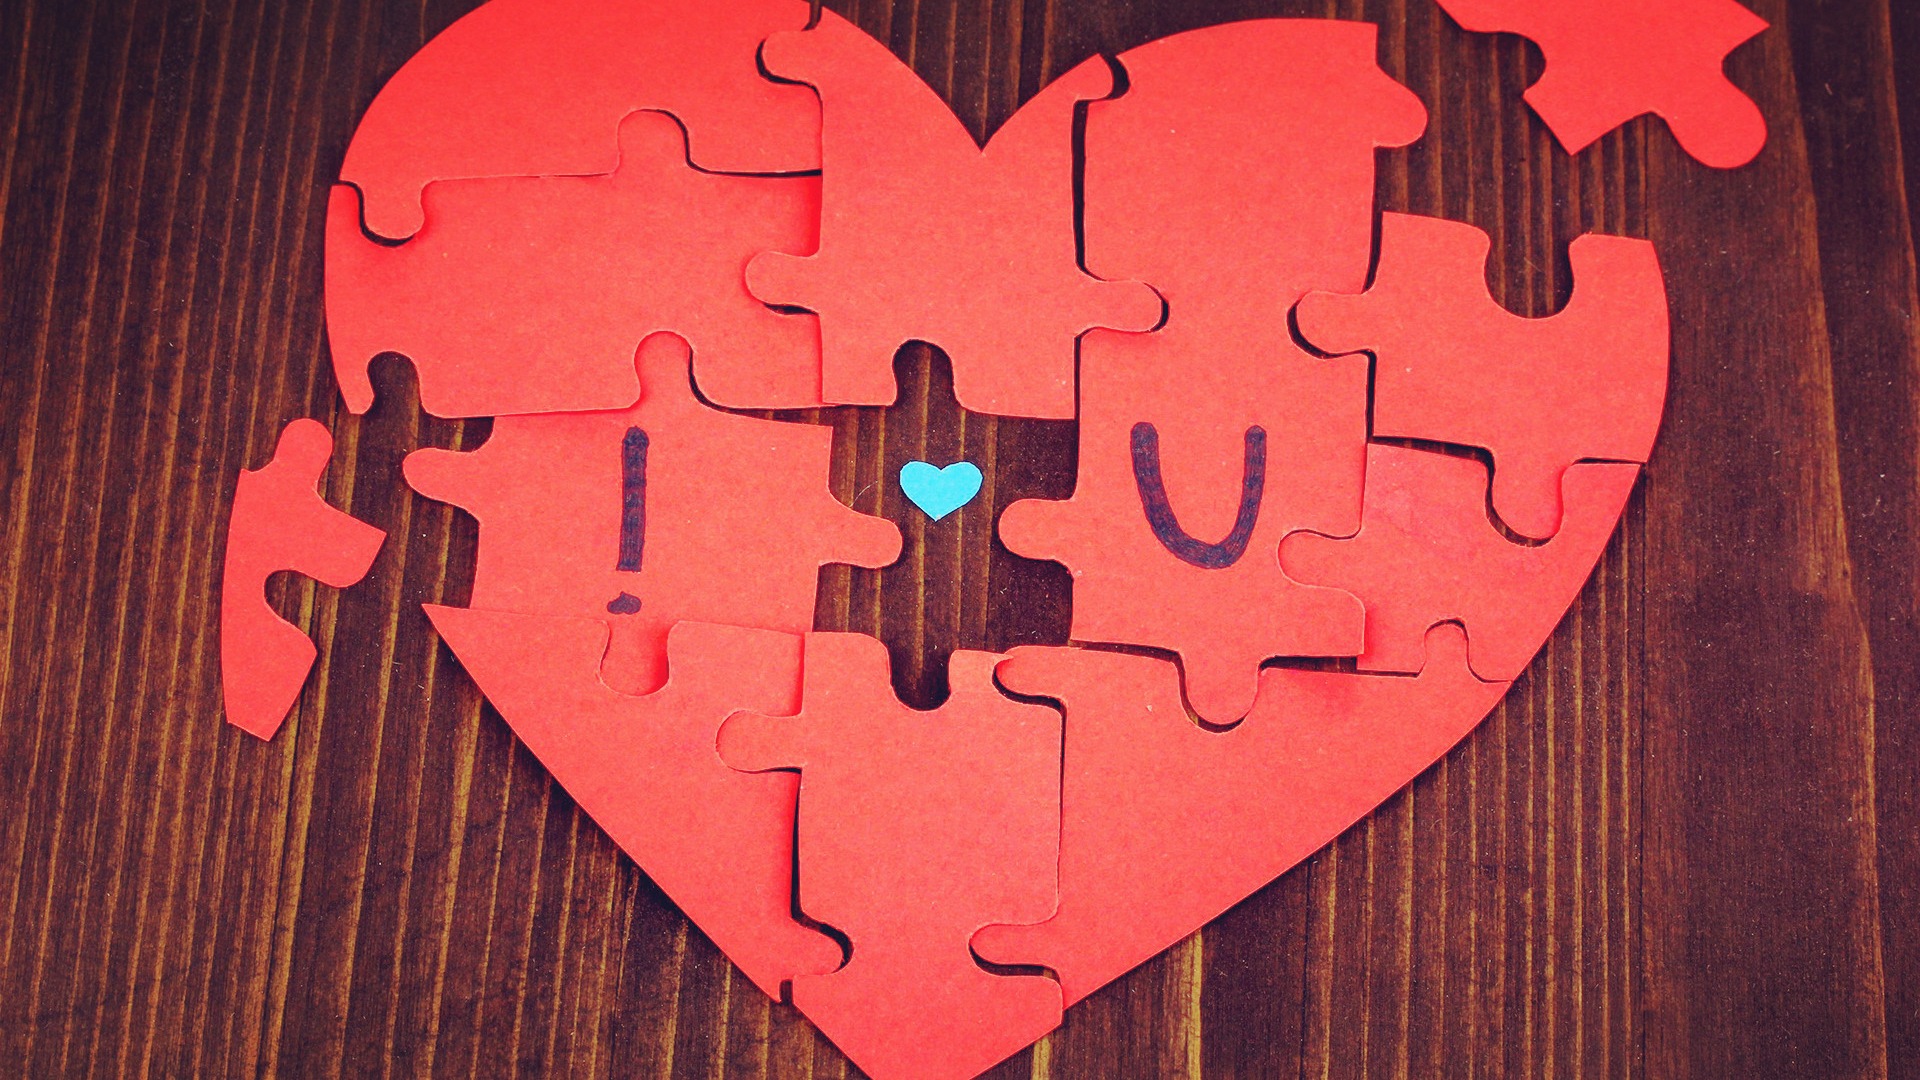 The theme of love, creative heart-shaped HD wallpapers #6 - 1920x1080